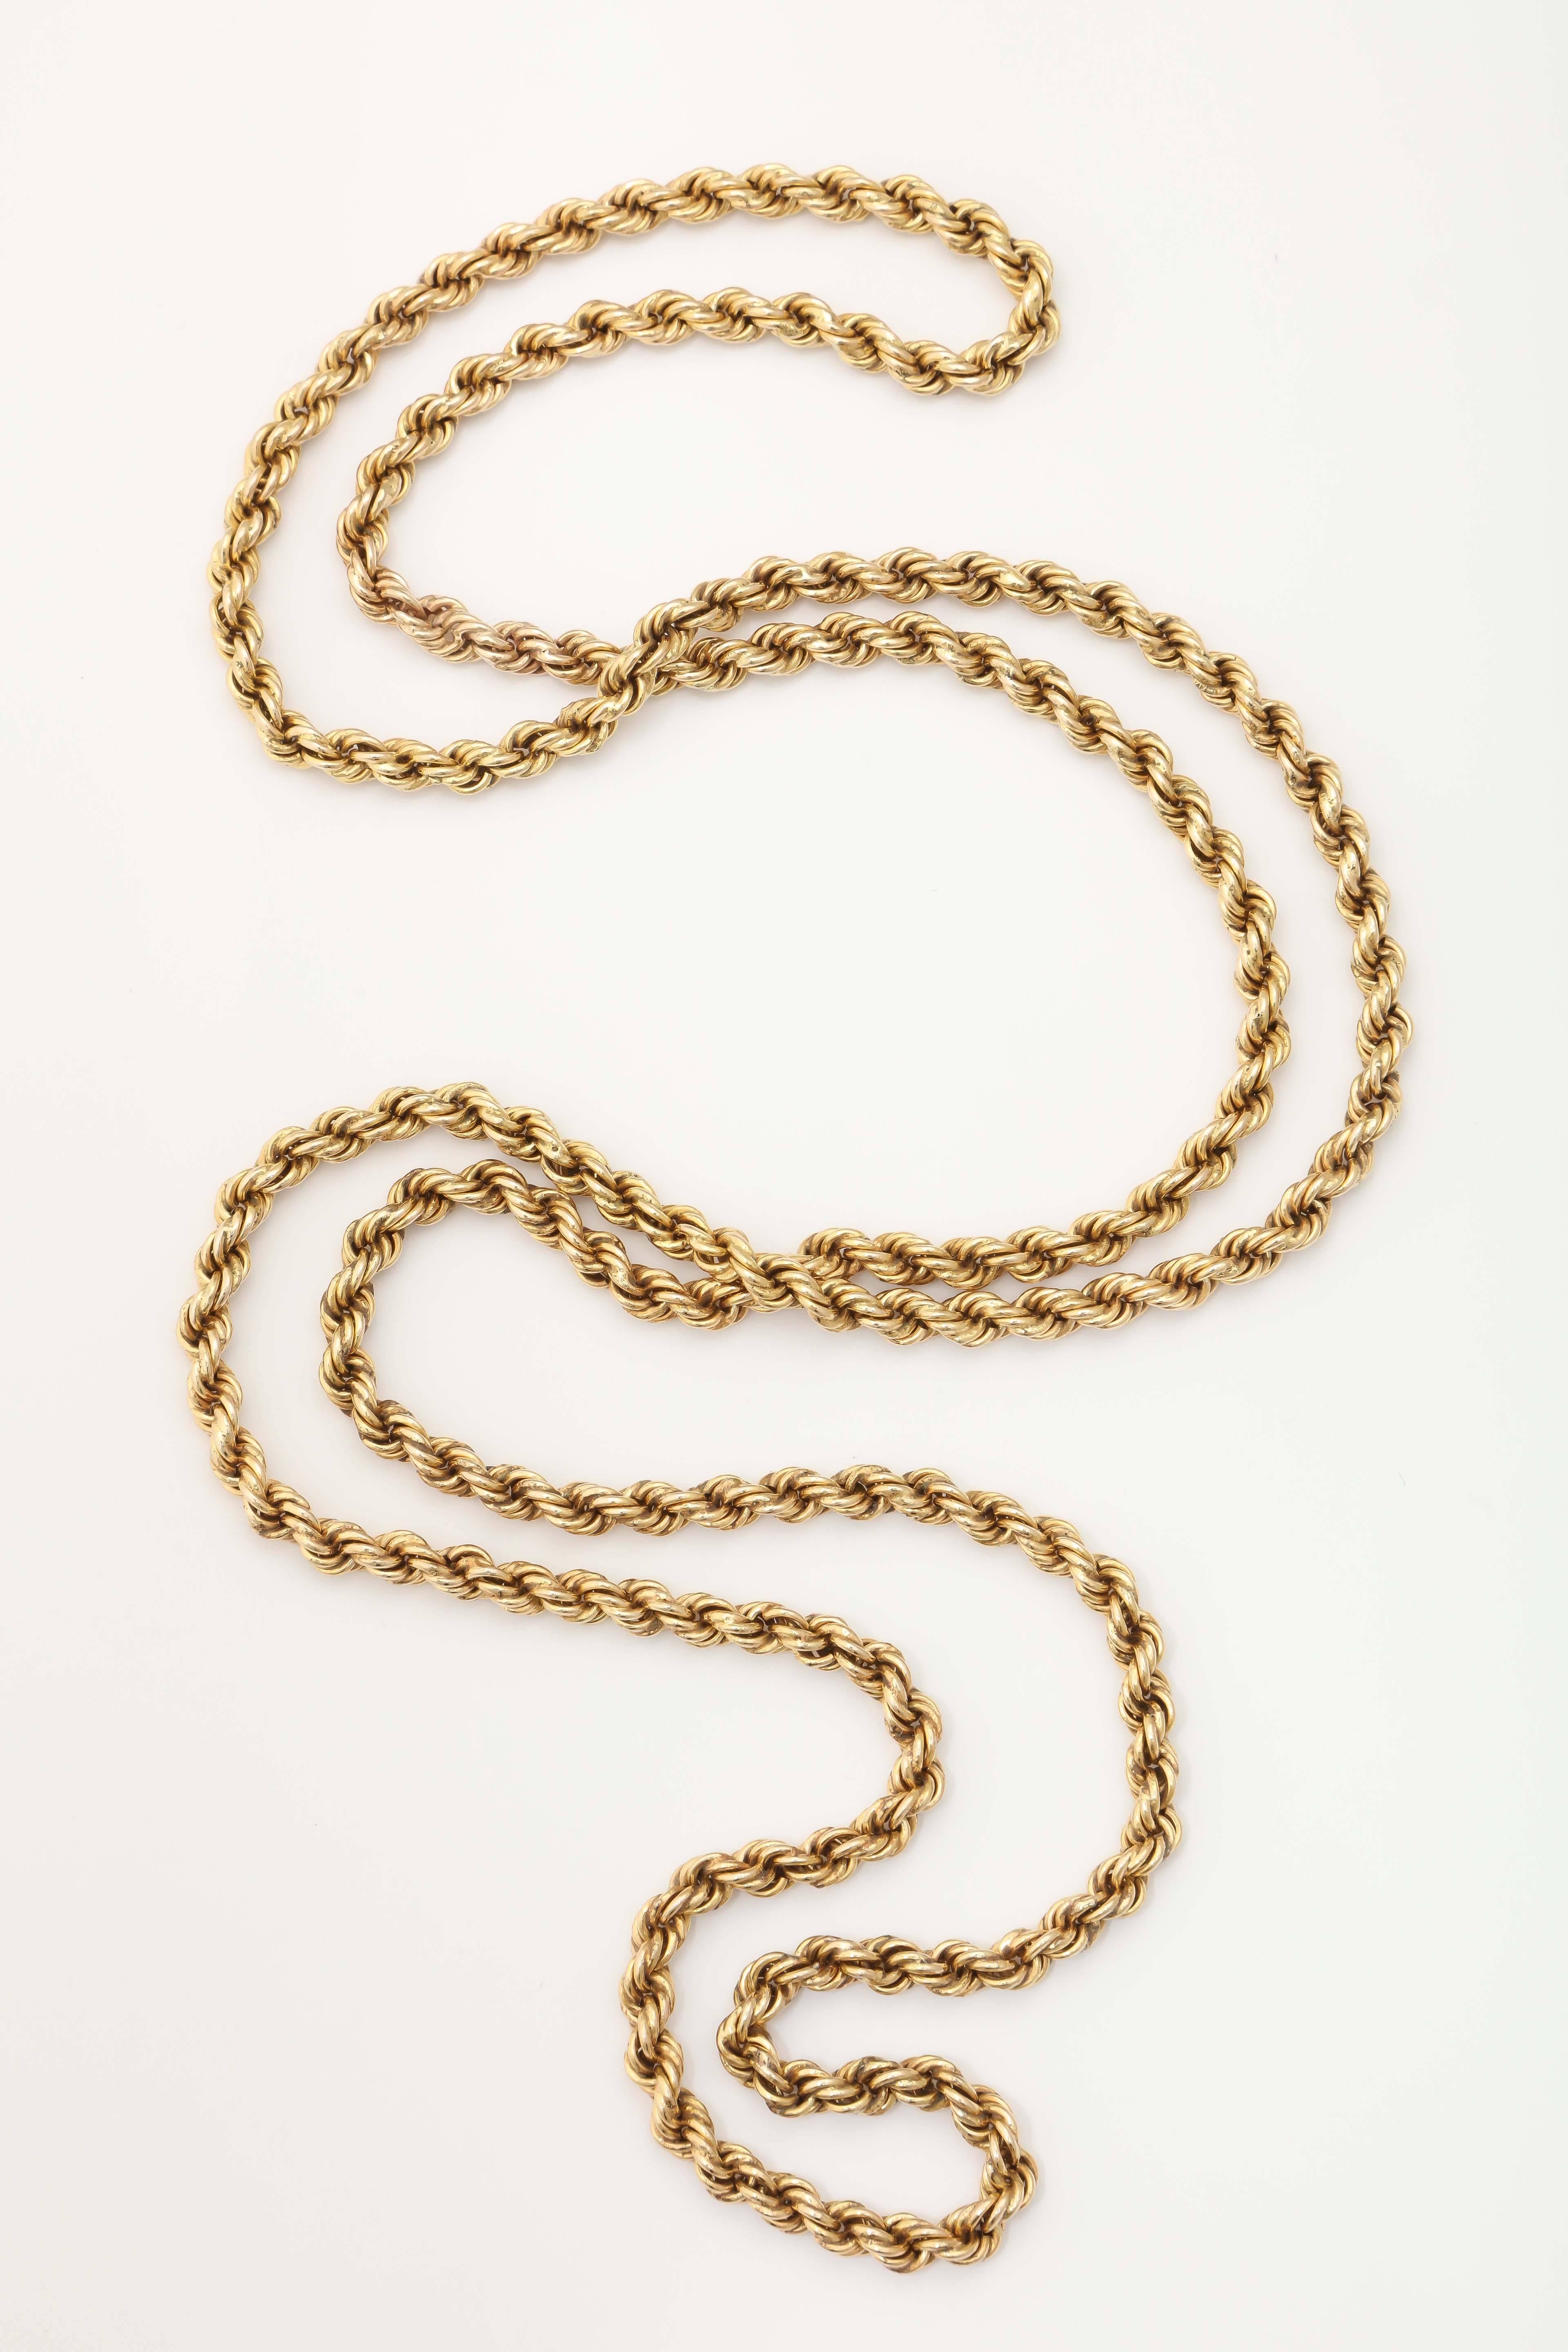 14kt Yellow Gold Rope Chain.  Ca 1940.  Never ending - no clasp. A staple choice - worn with anything and everywhere. Almost 3 ounces.